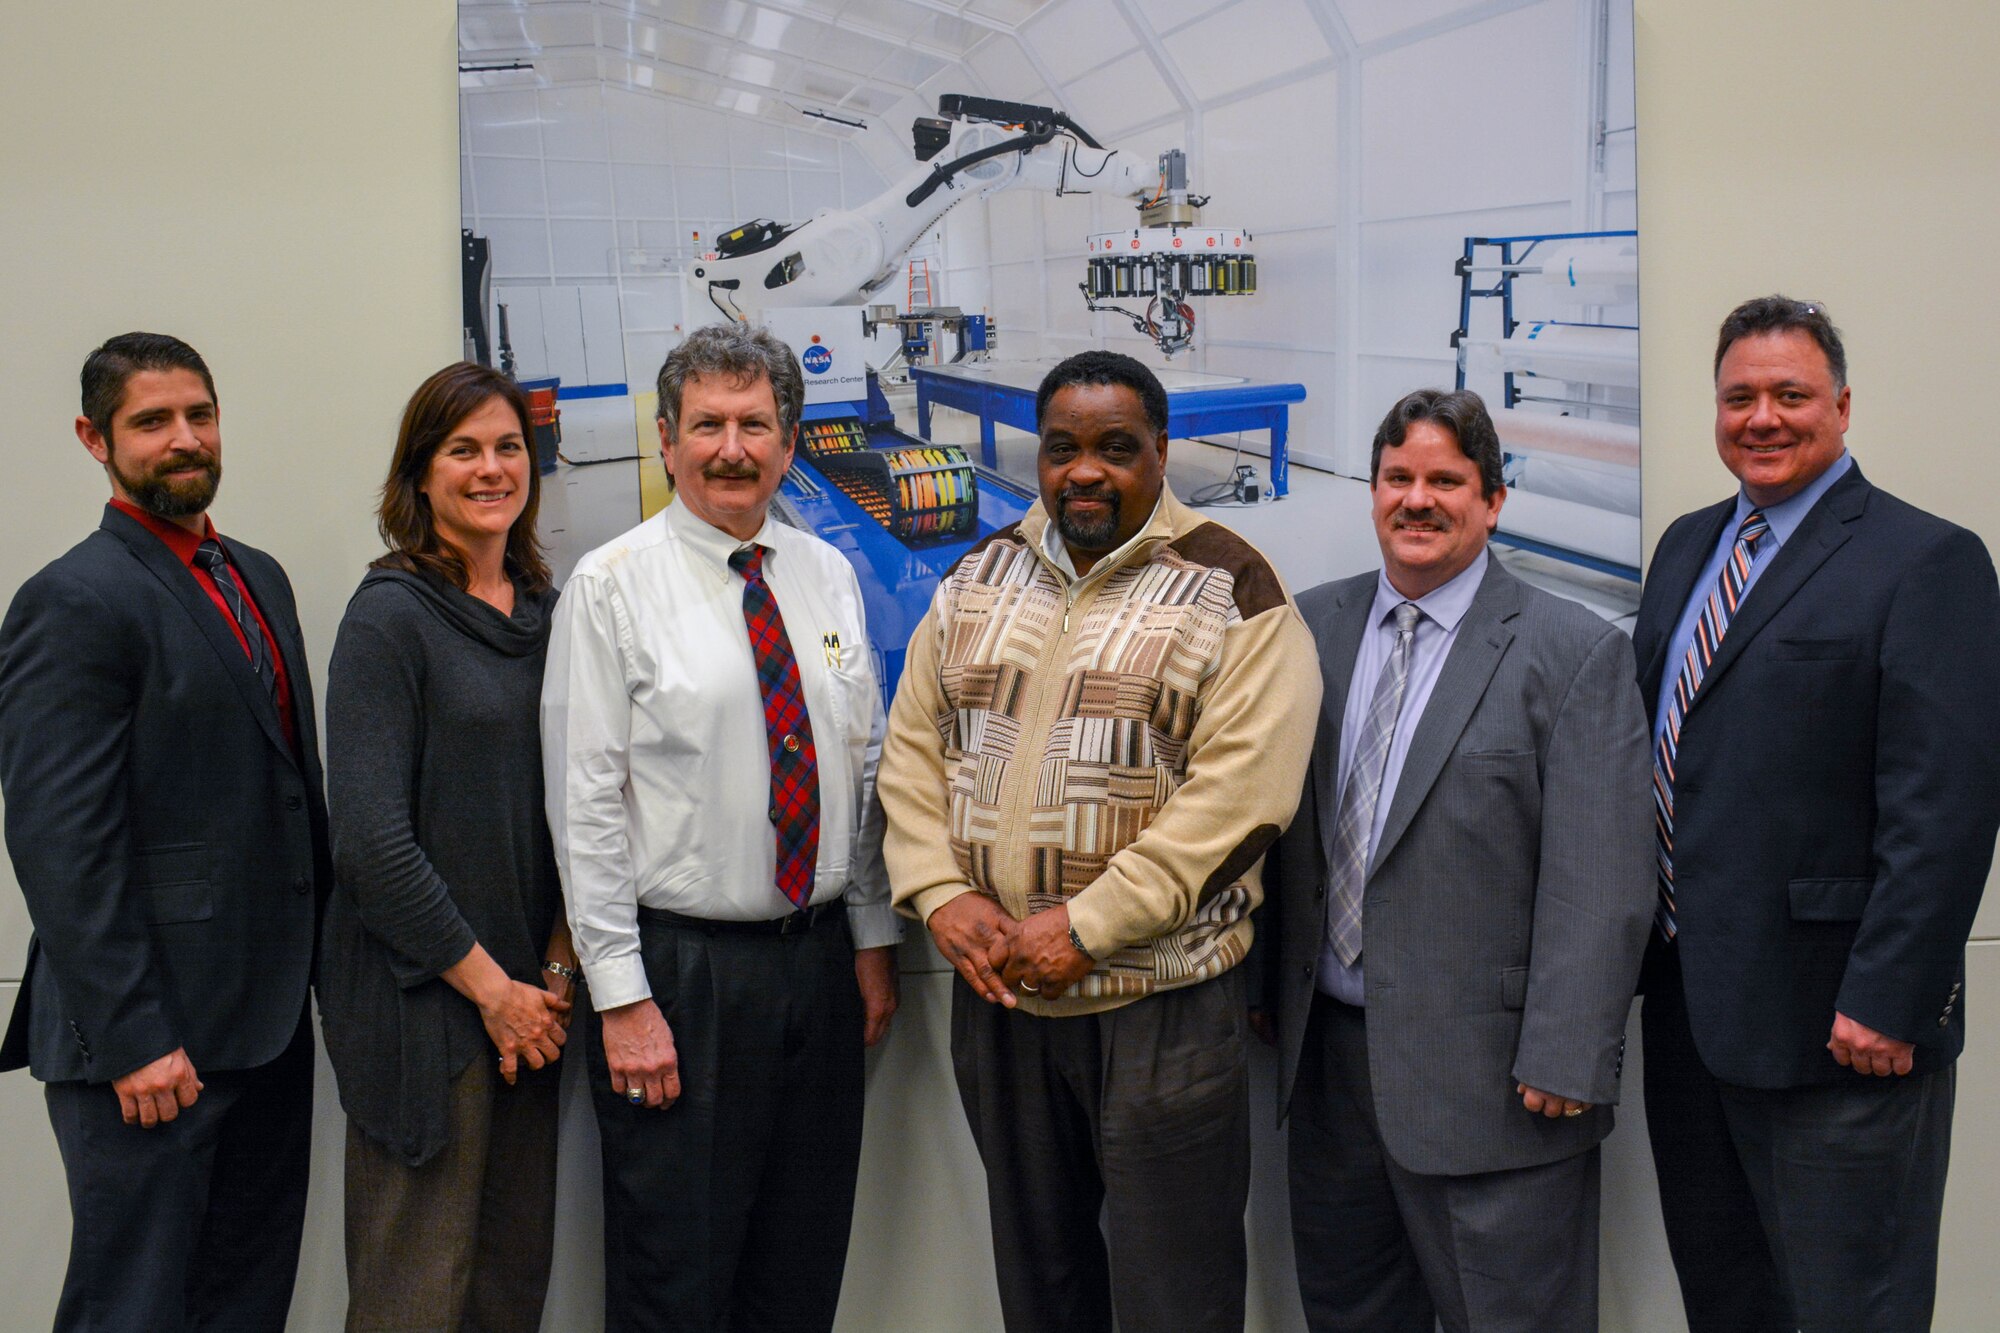 Six individuals pose in front of photo at NASA Langley Research Center